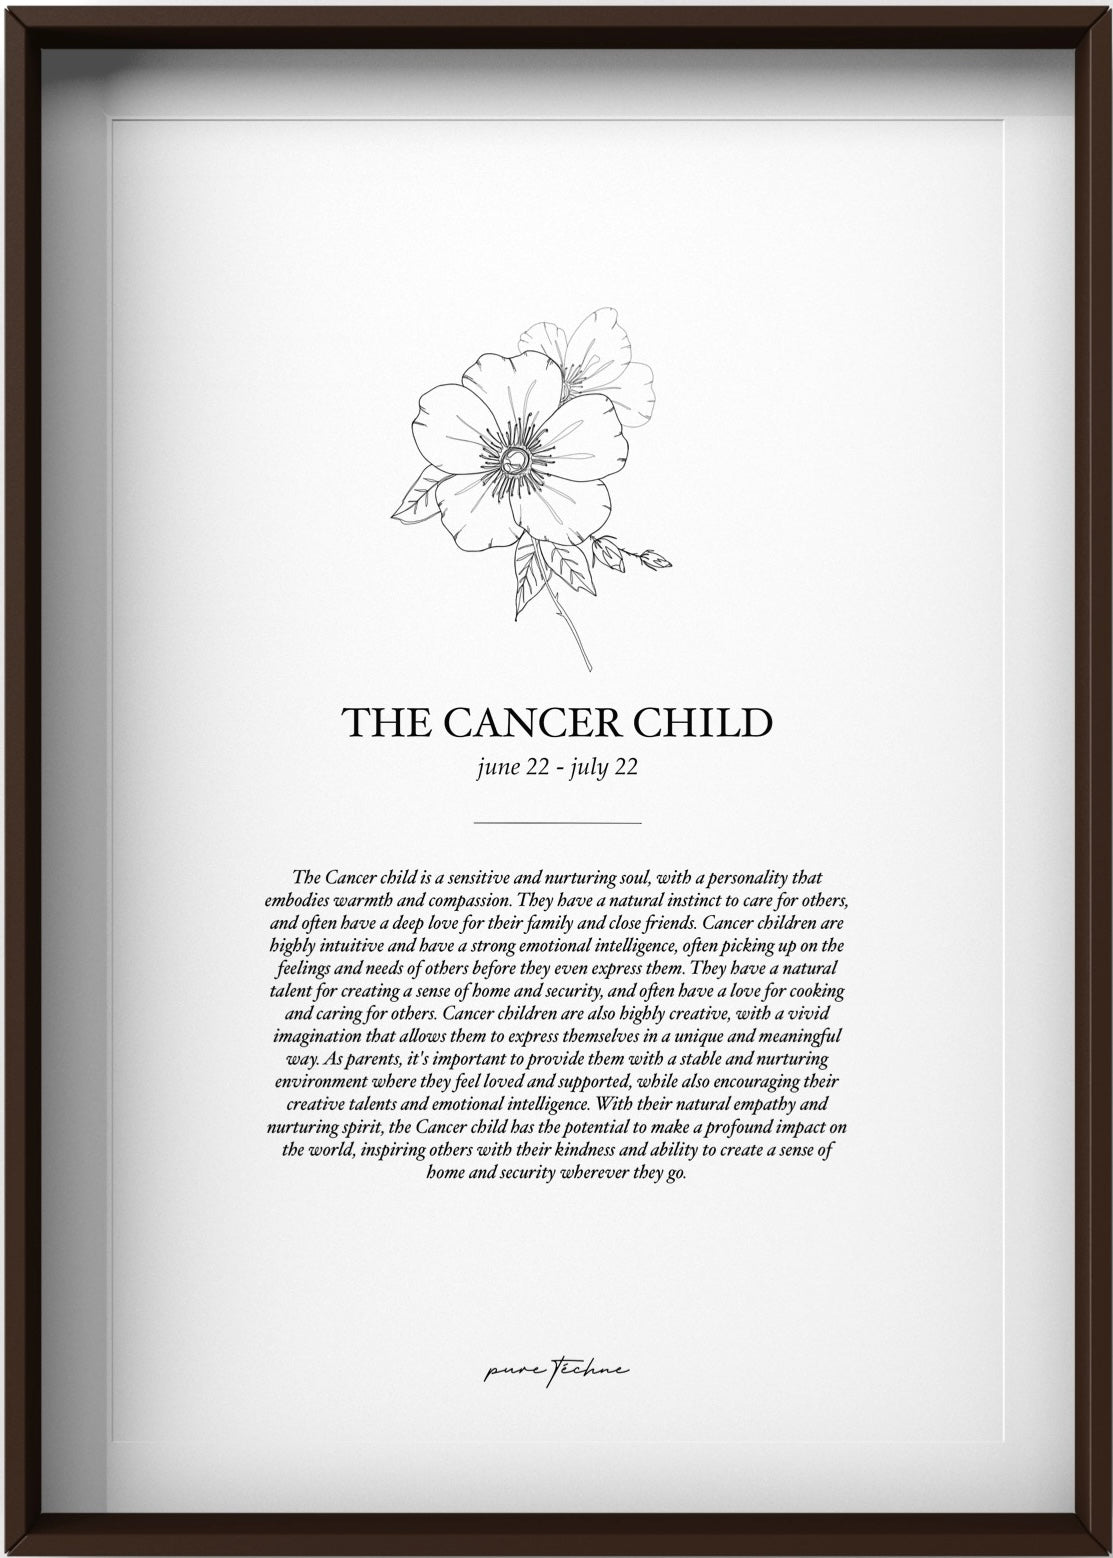 The Cancer Child